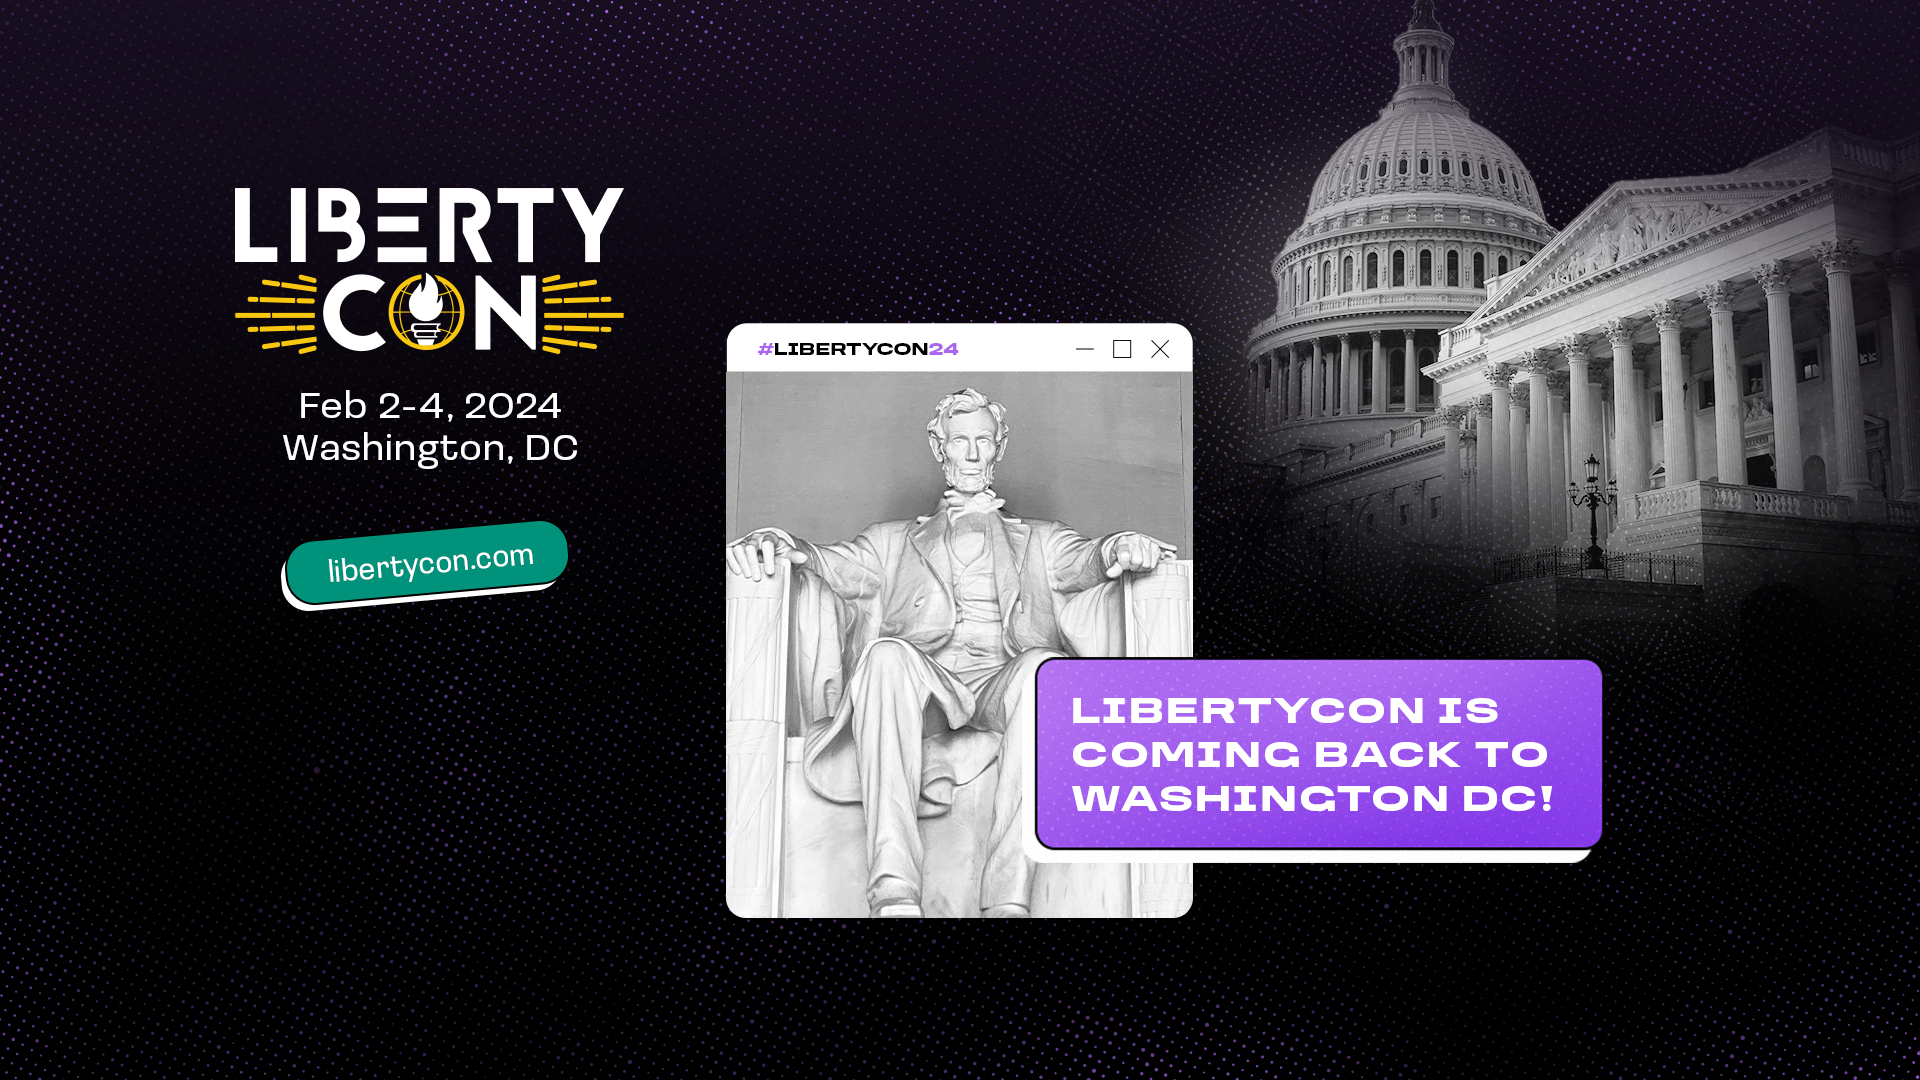 Step into a vibrant world of freedom and possibility at LibertyCon! Immerse yourself in captivating discussions, electrifying talks, and a dynamic atmosphere that will reignite your passion for individual rights, limited government, and free markets